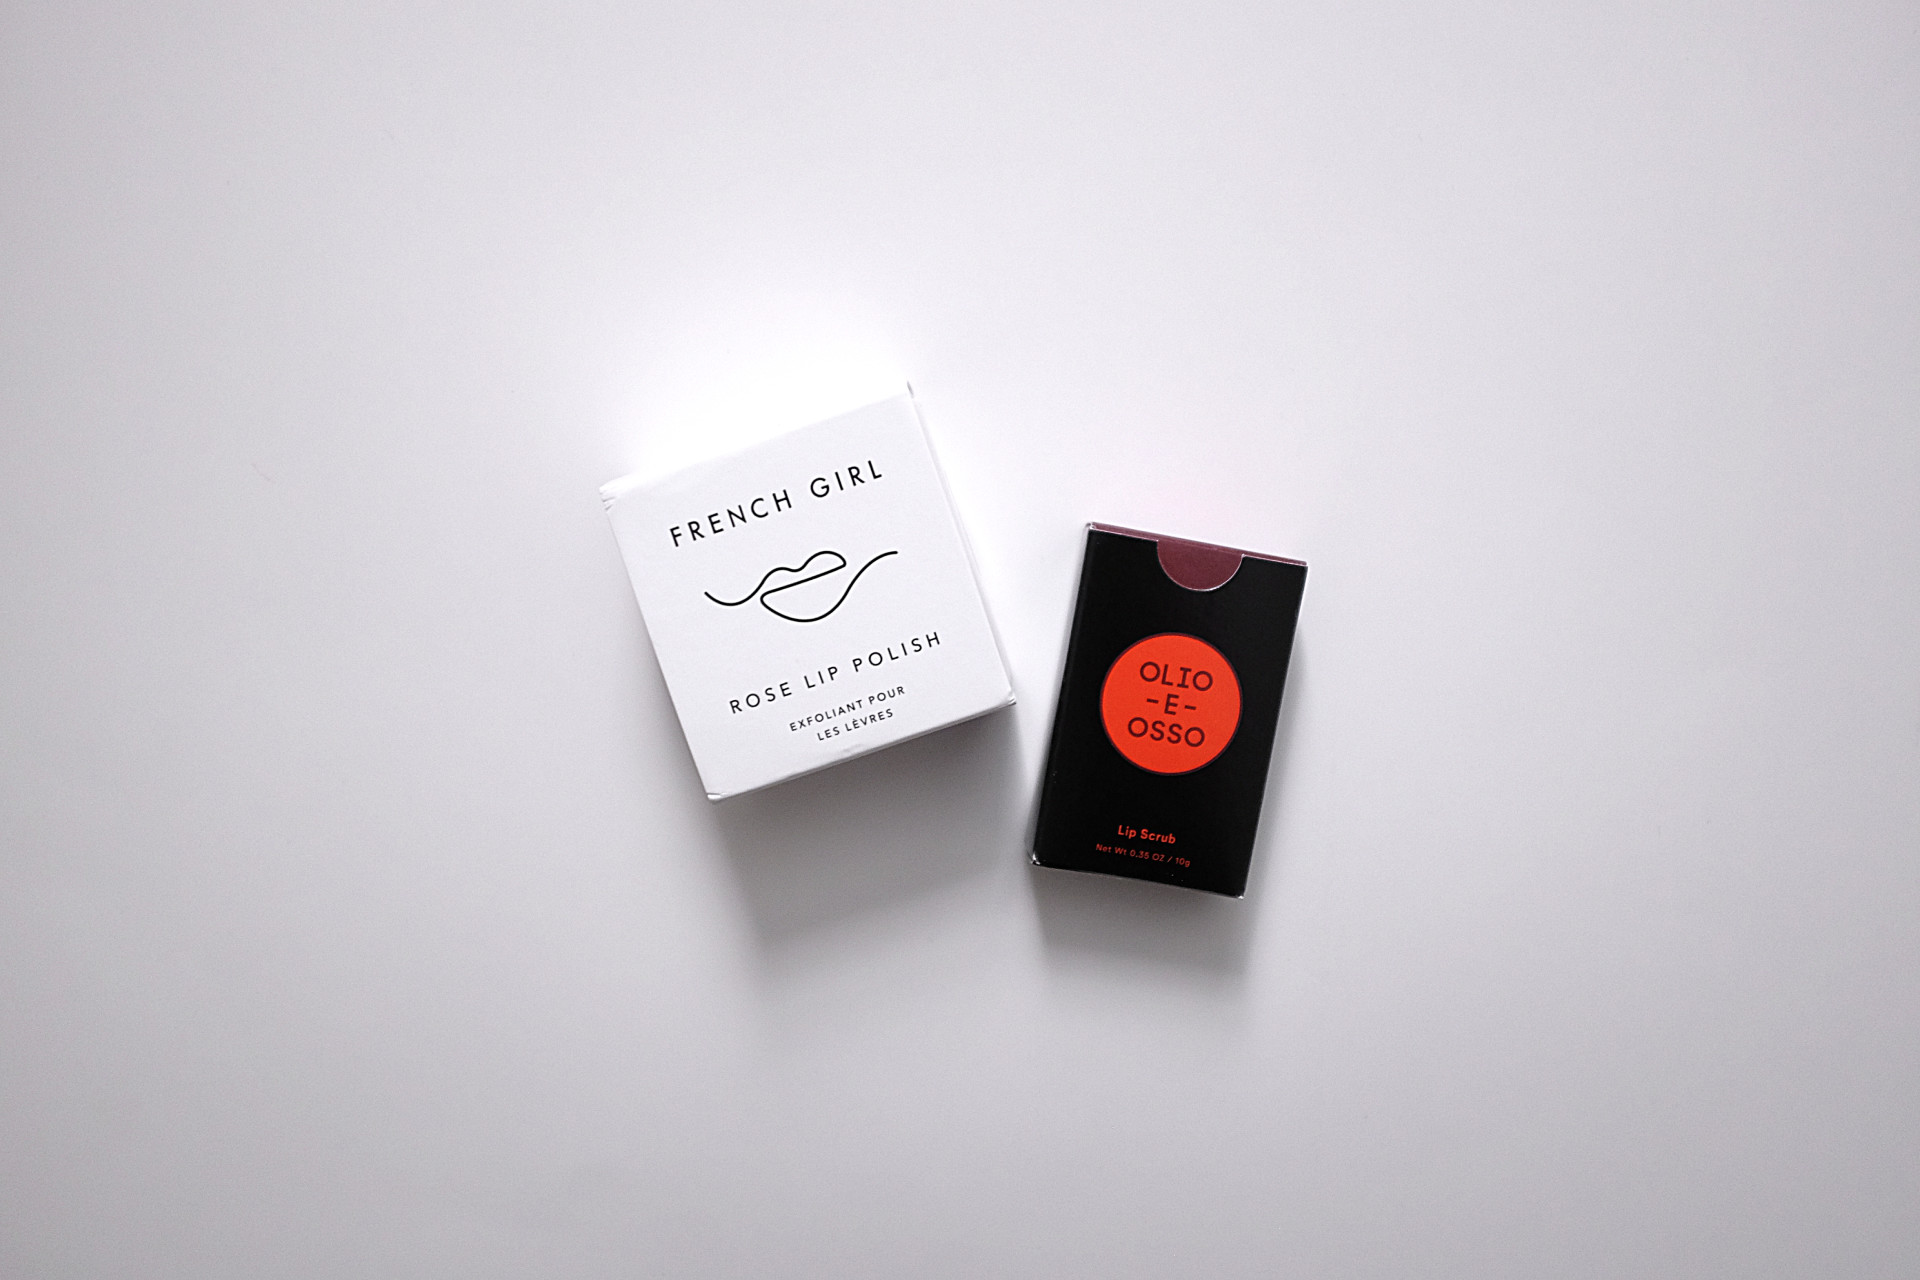 Two small boxes on a white background. On the left is a white box that reads "FRENCH GIRL rose lip polish" with an abstract lip line drawing. On the right is a black box with a red circle which has "Olio e Osso" printed in it